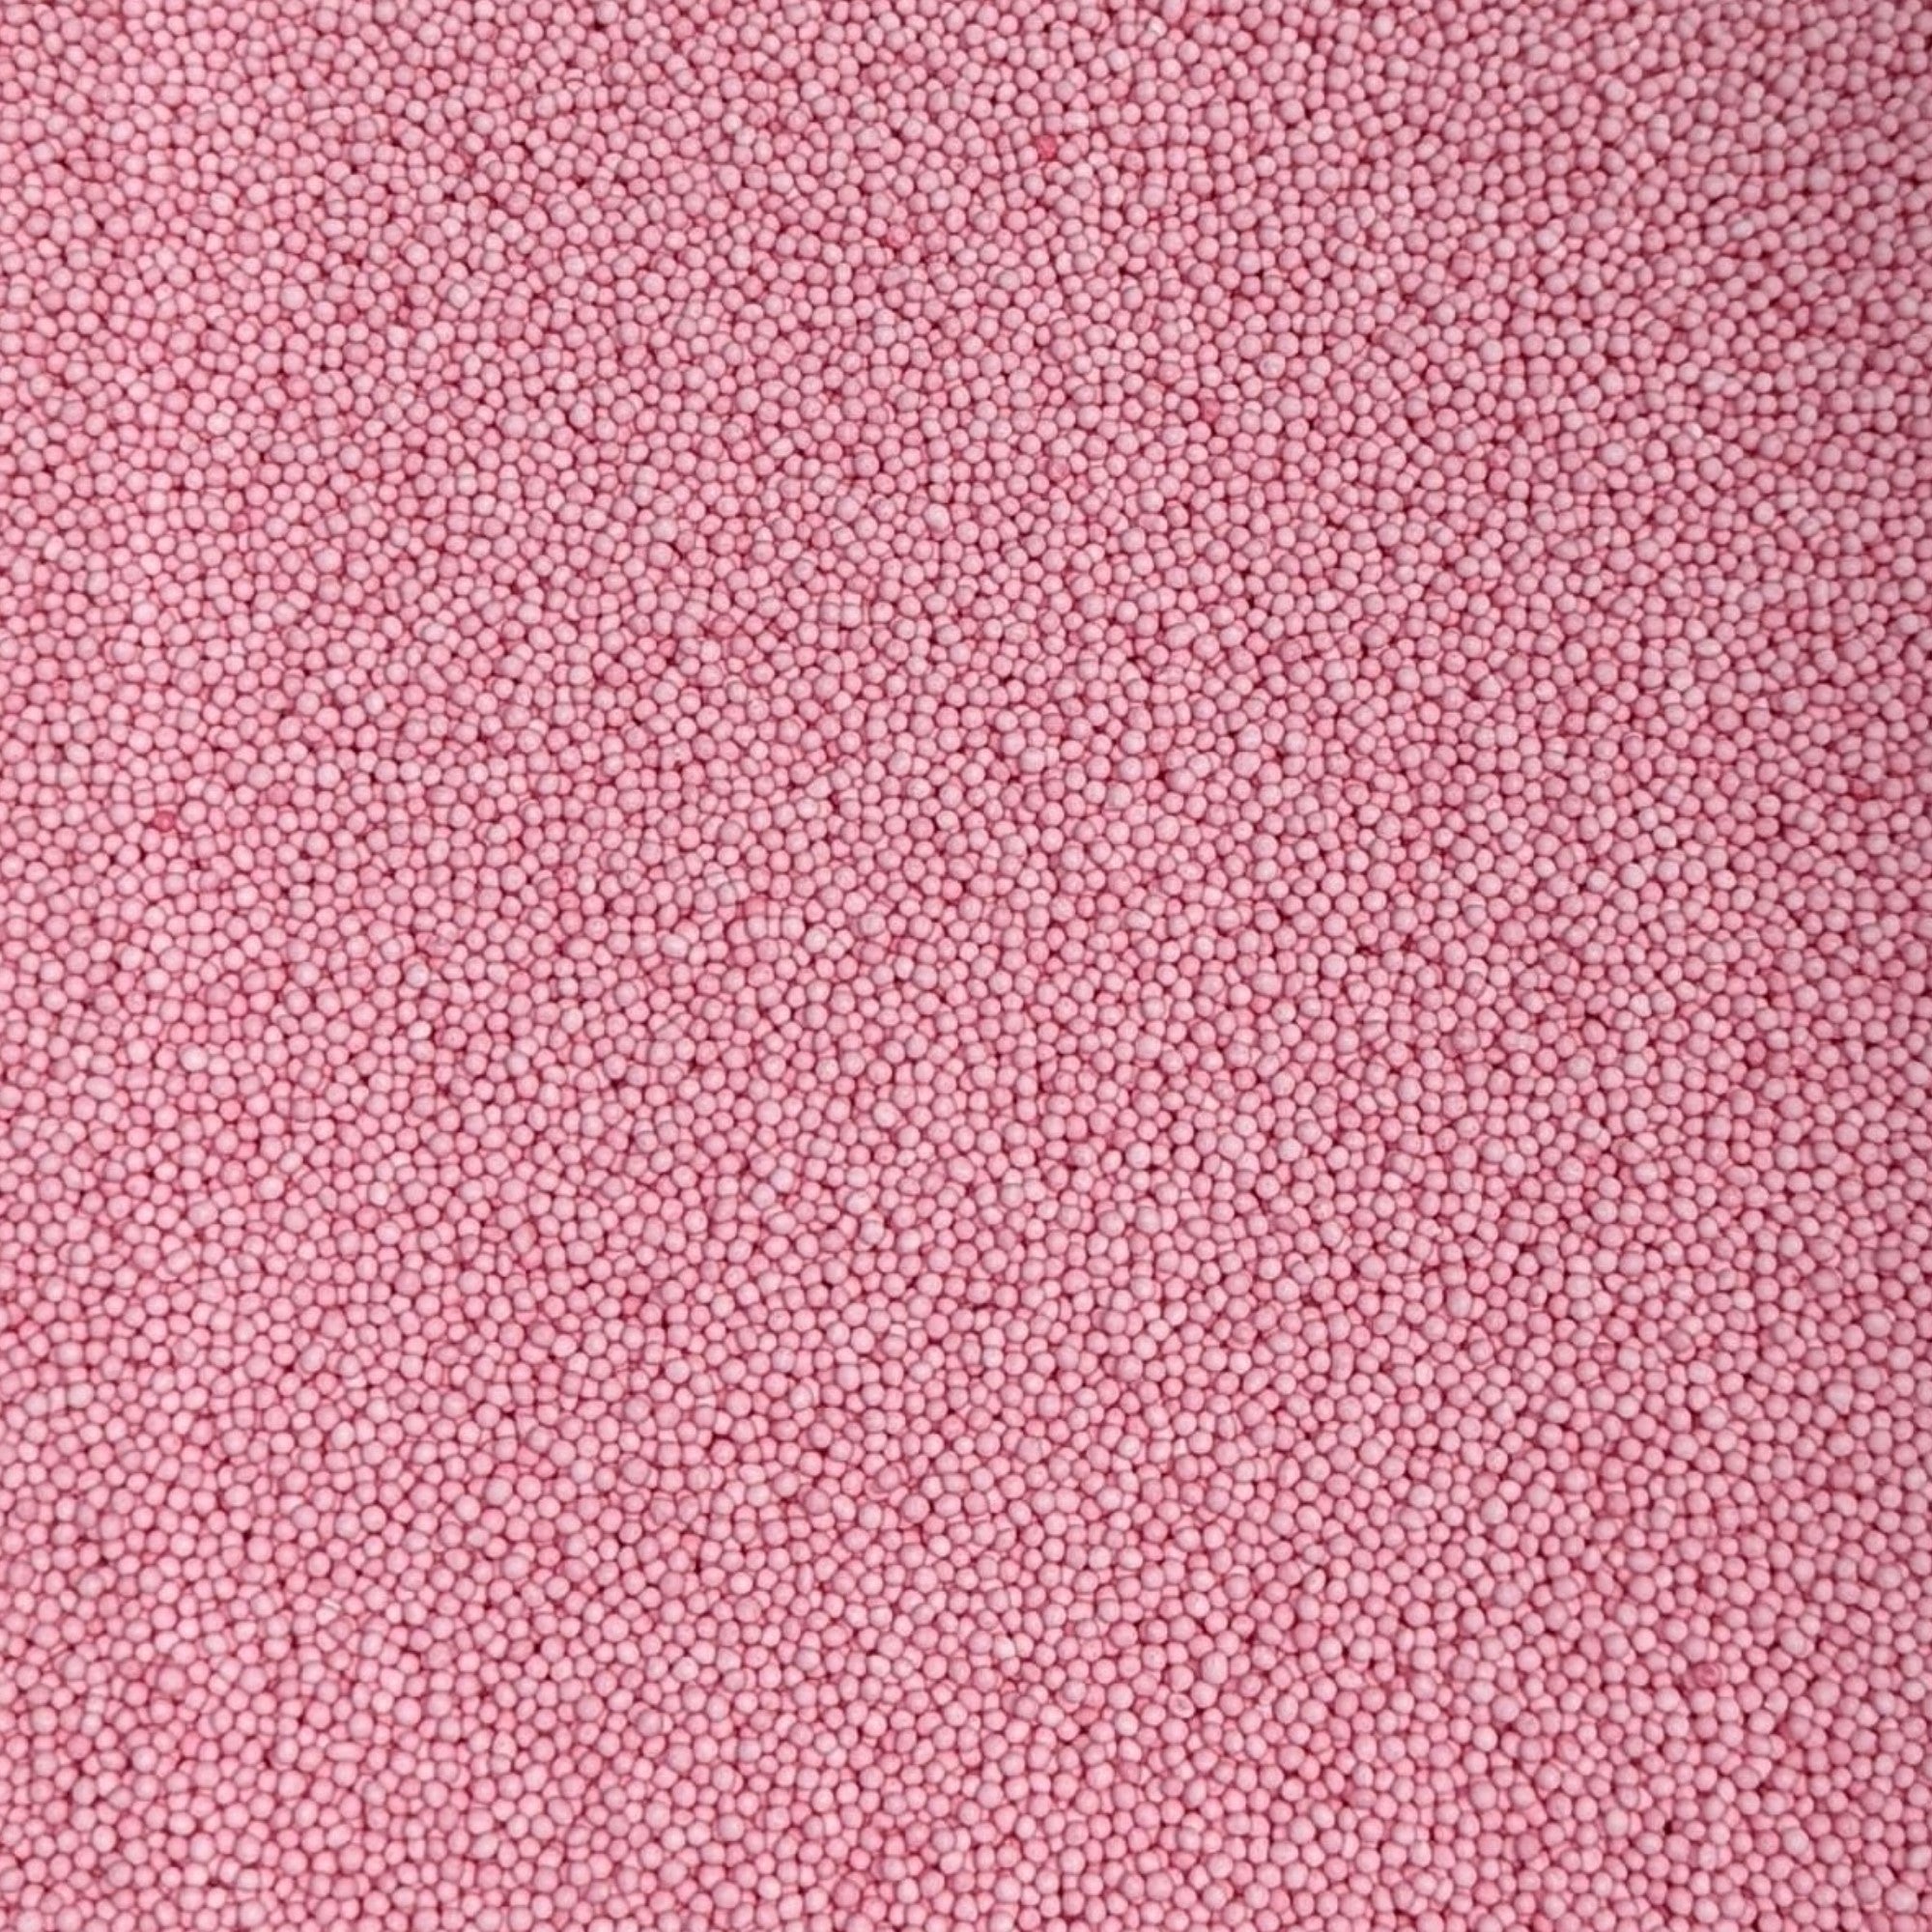 Pink Matt 100s & 1000s Cupcake / Cake Decoration Sprinkles Toppers